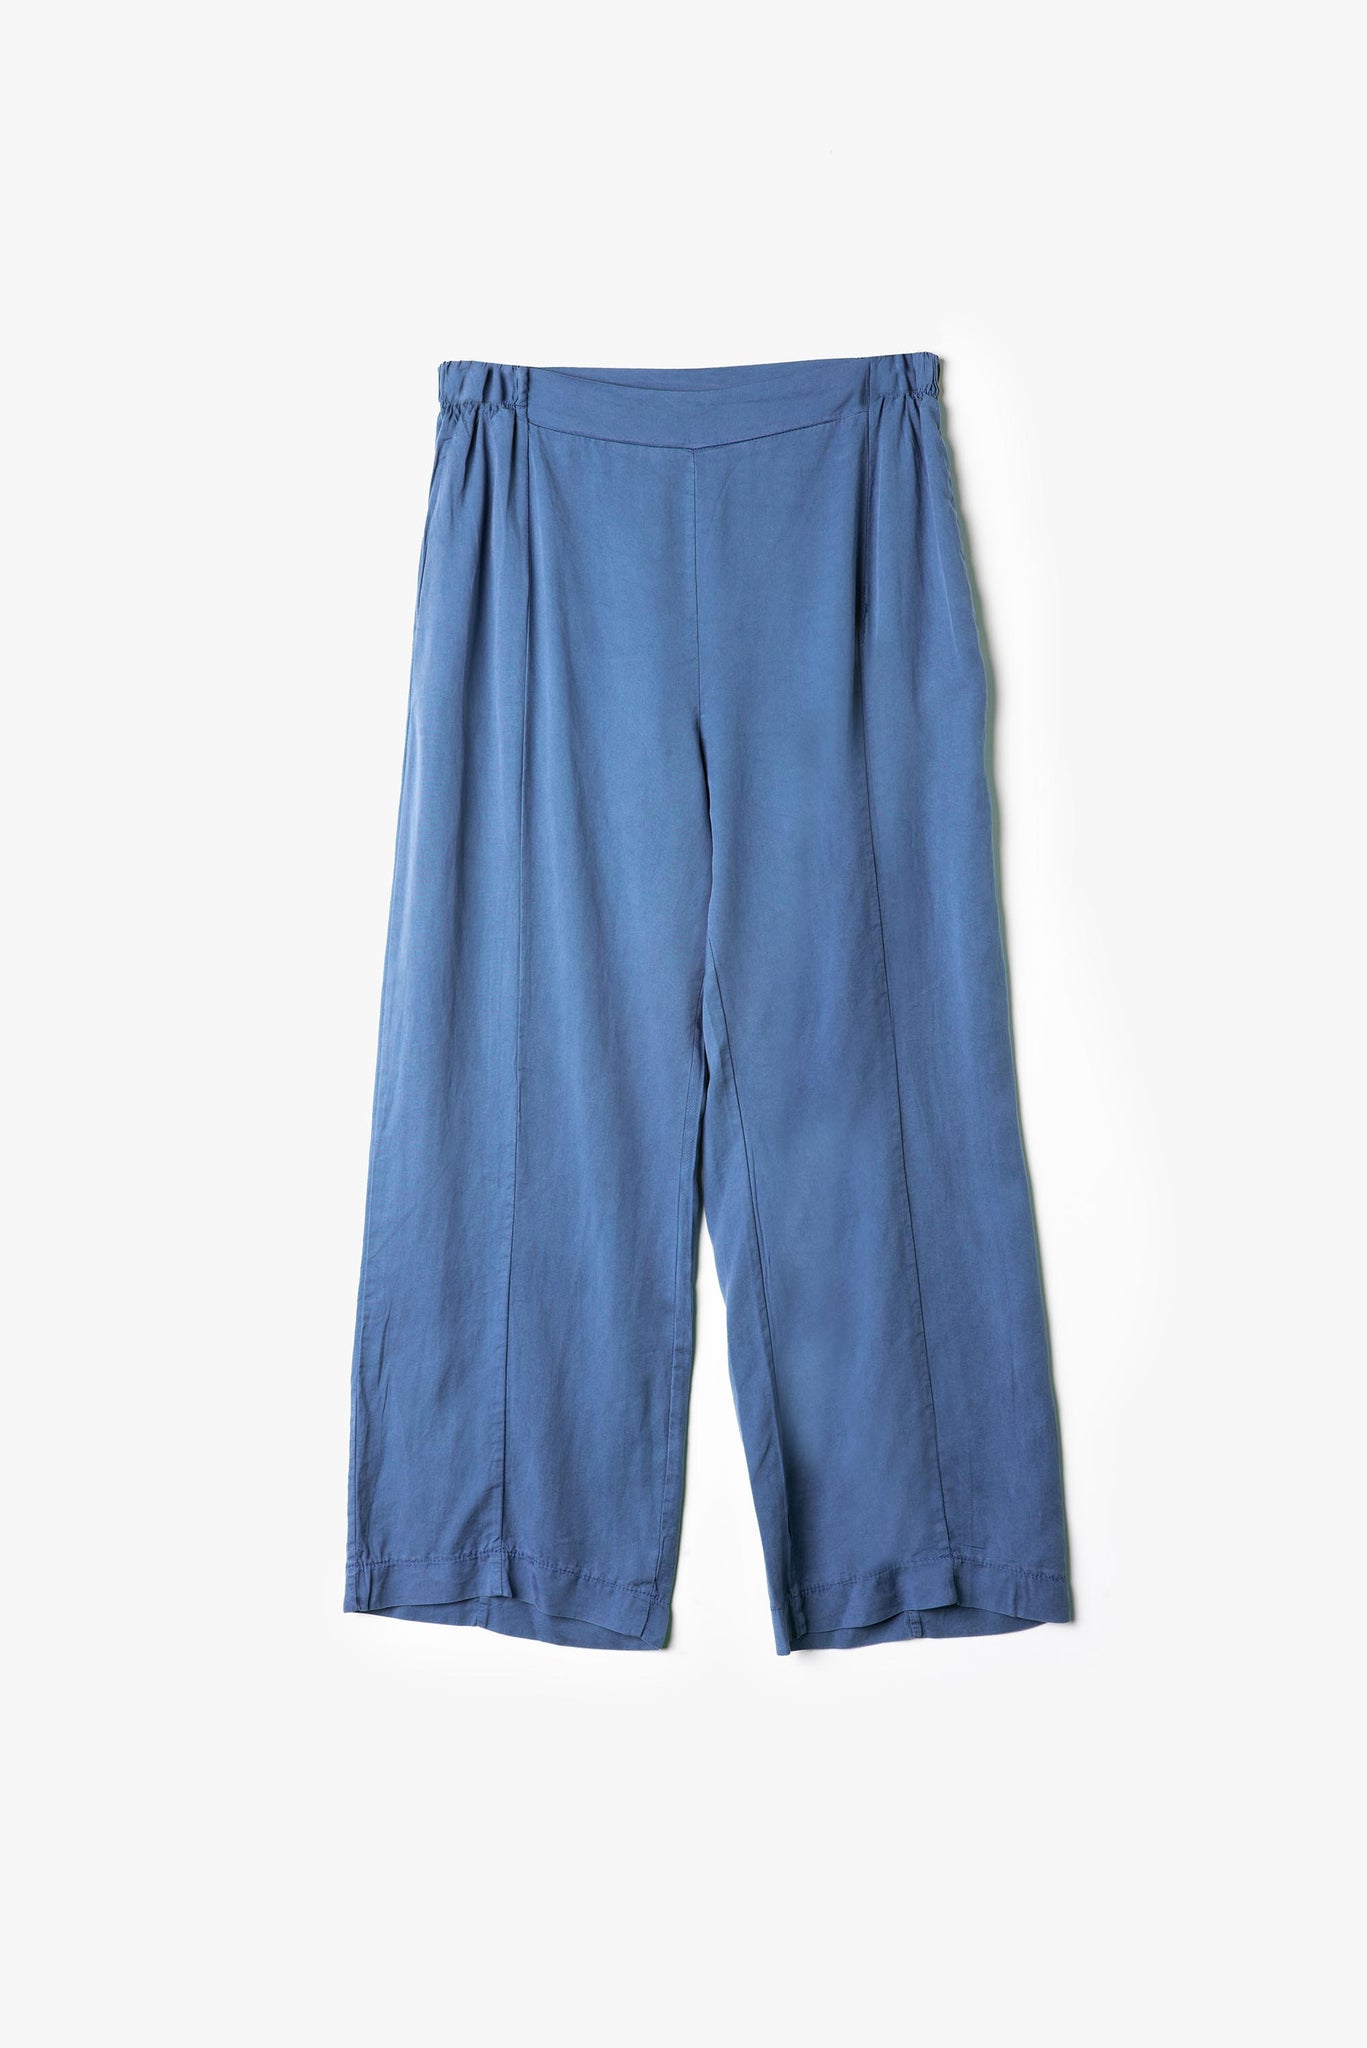 Basque trousers